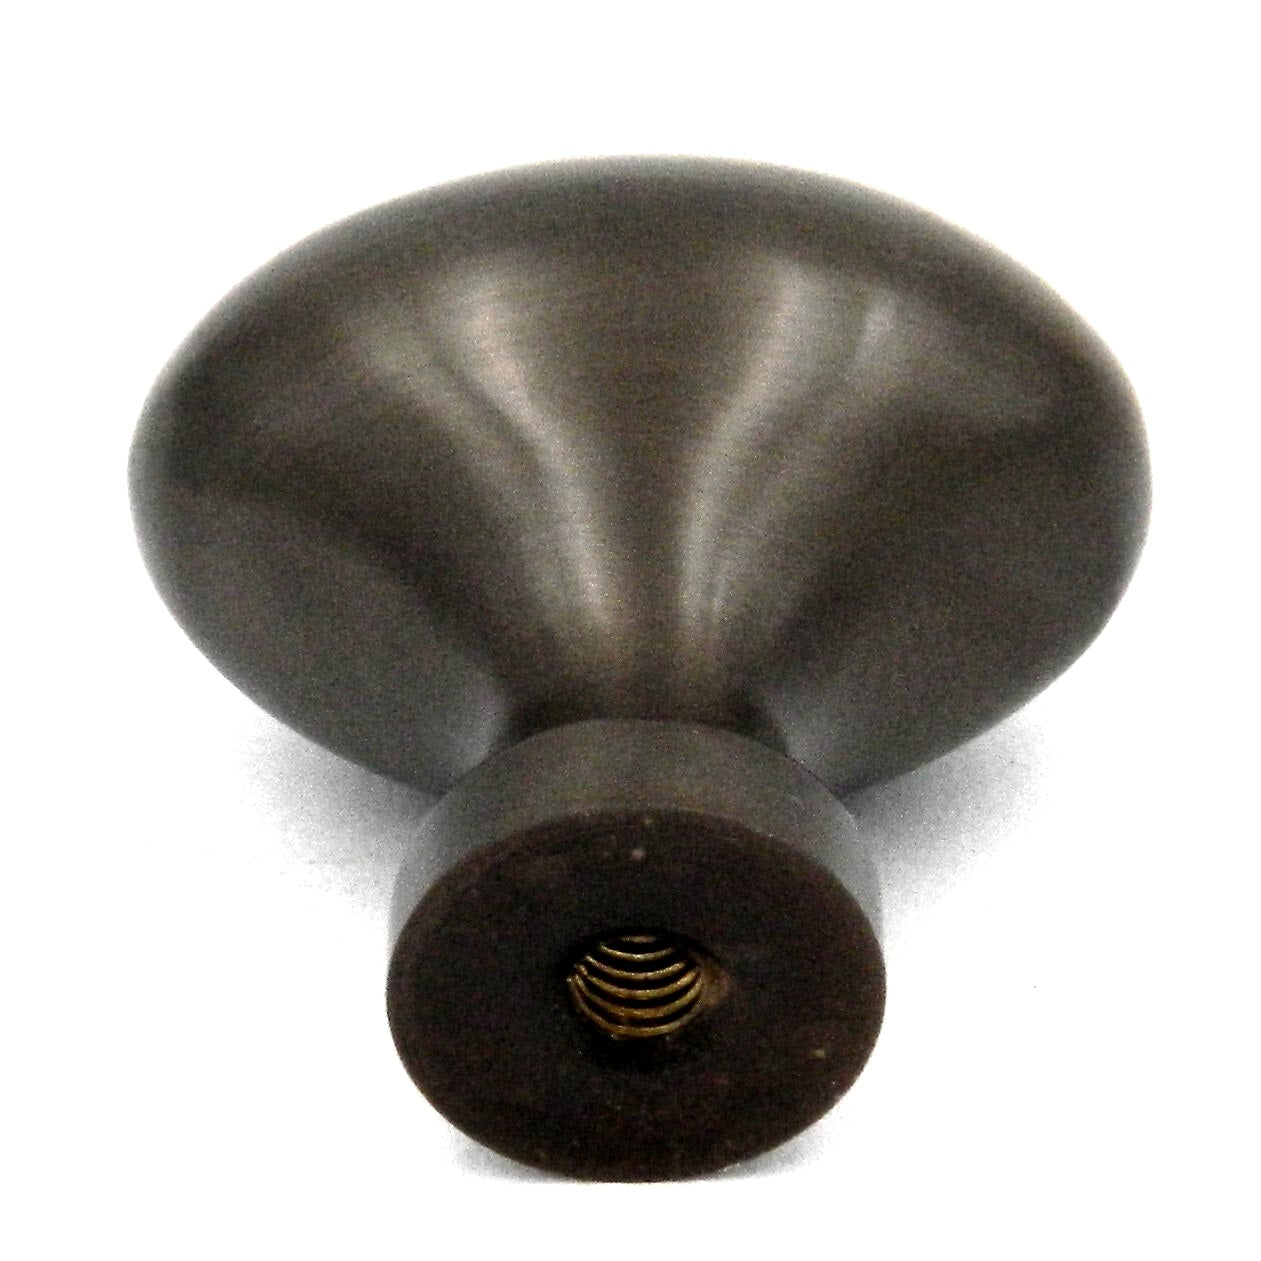 Keeler Power & Beauty Satin Dover Oval Smooth 1 1/4" Solid Brass Cabinet Knob P9175-9013